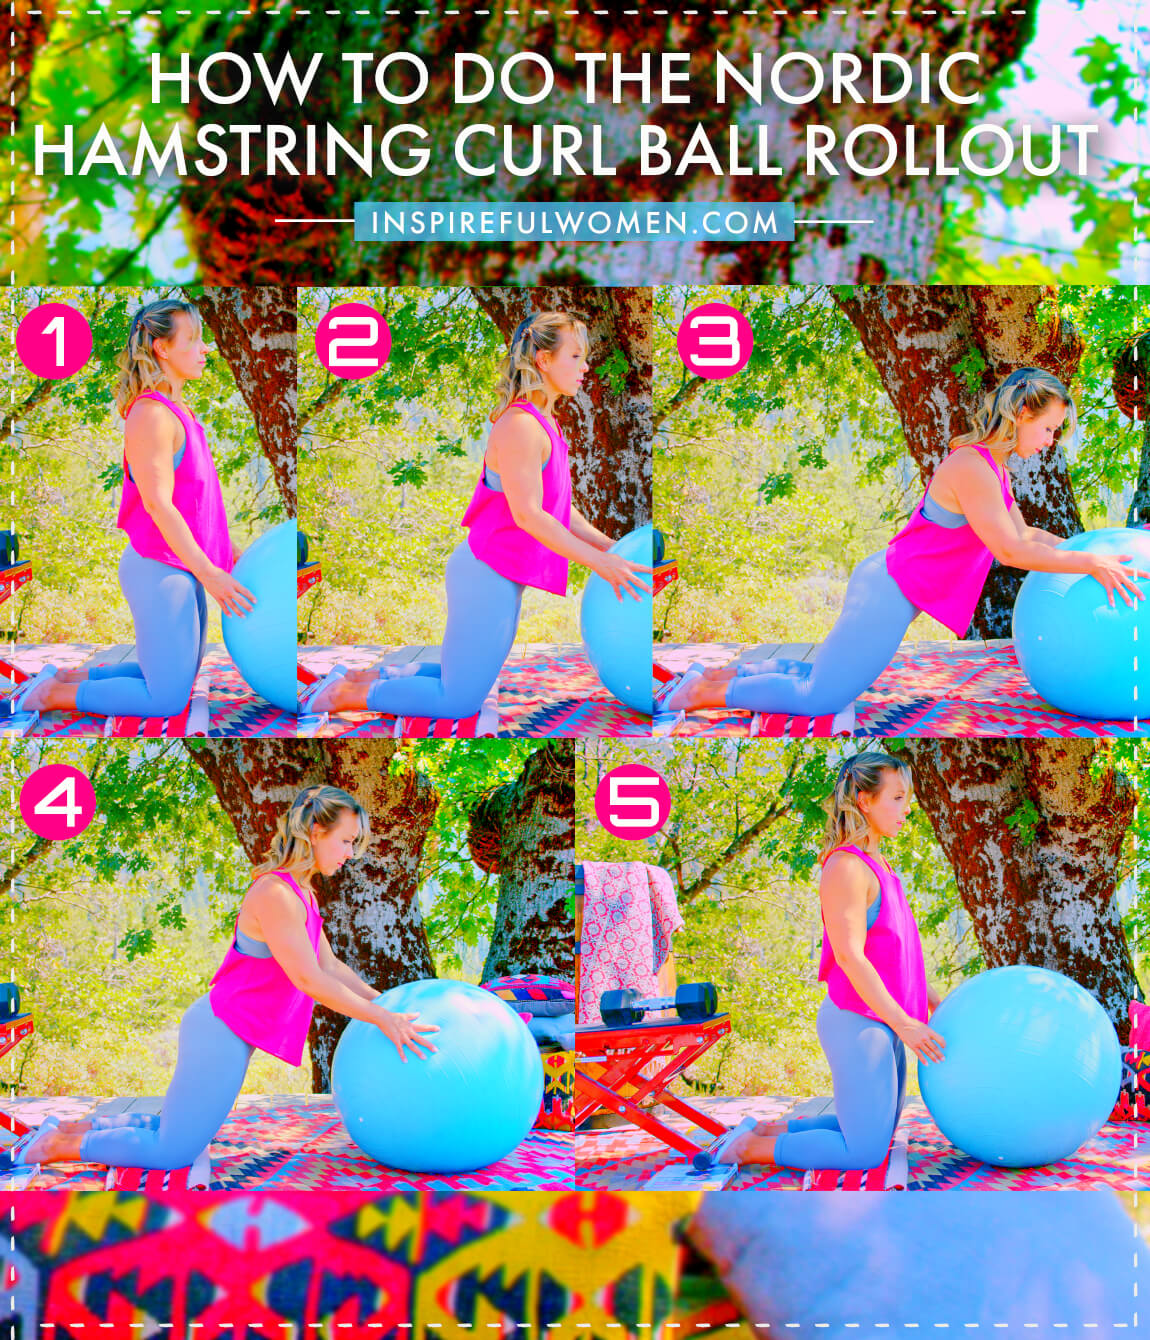 how-to-nordic-hamstring-curl-ball-rollout-at-home-women-40+